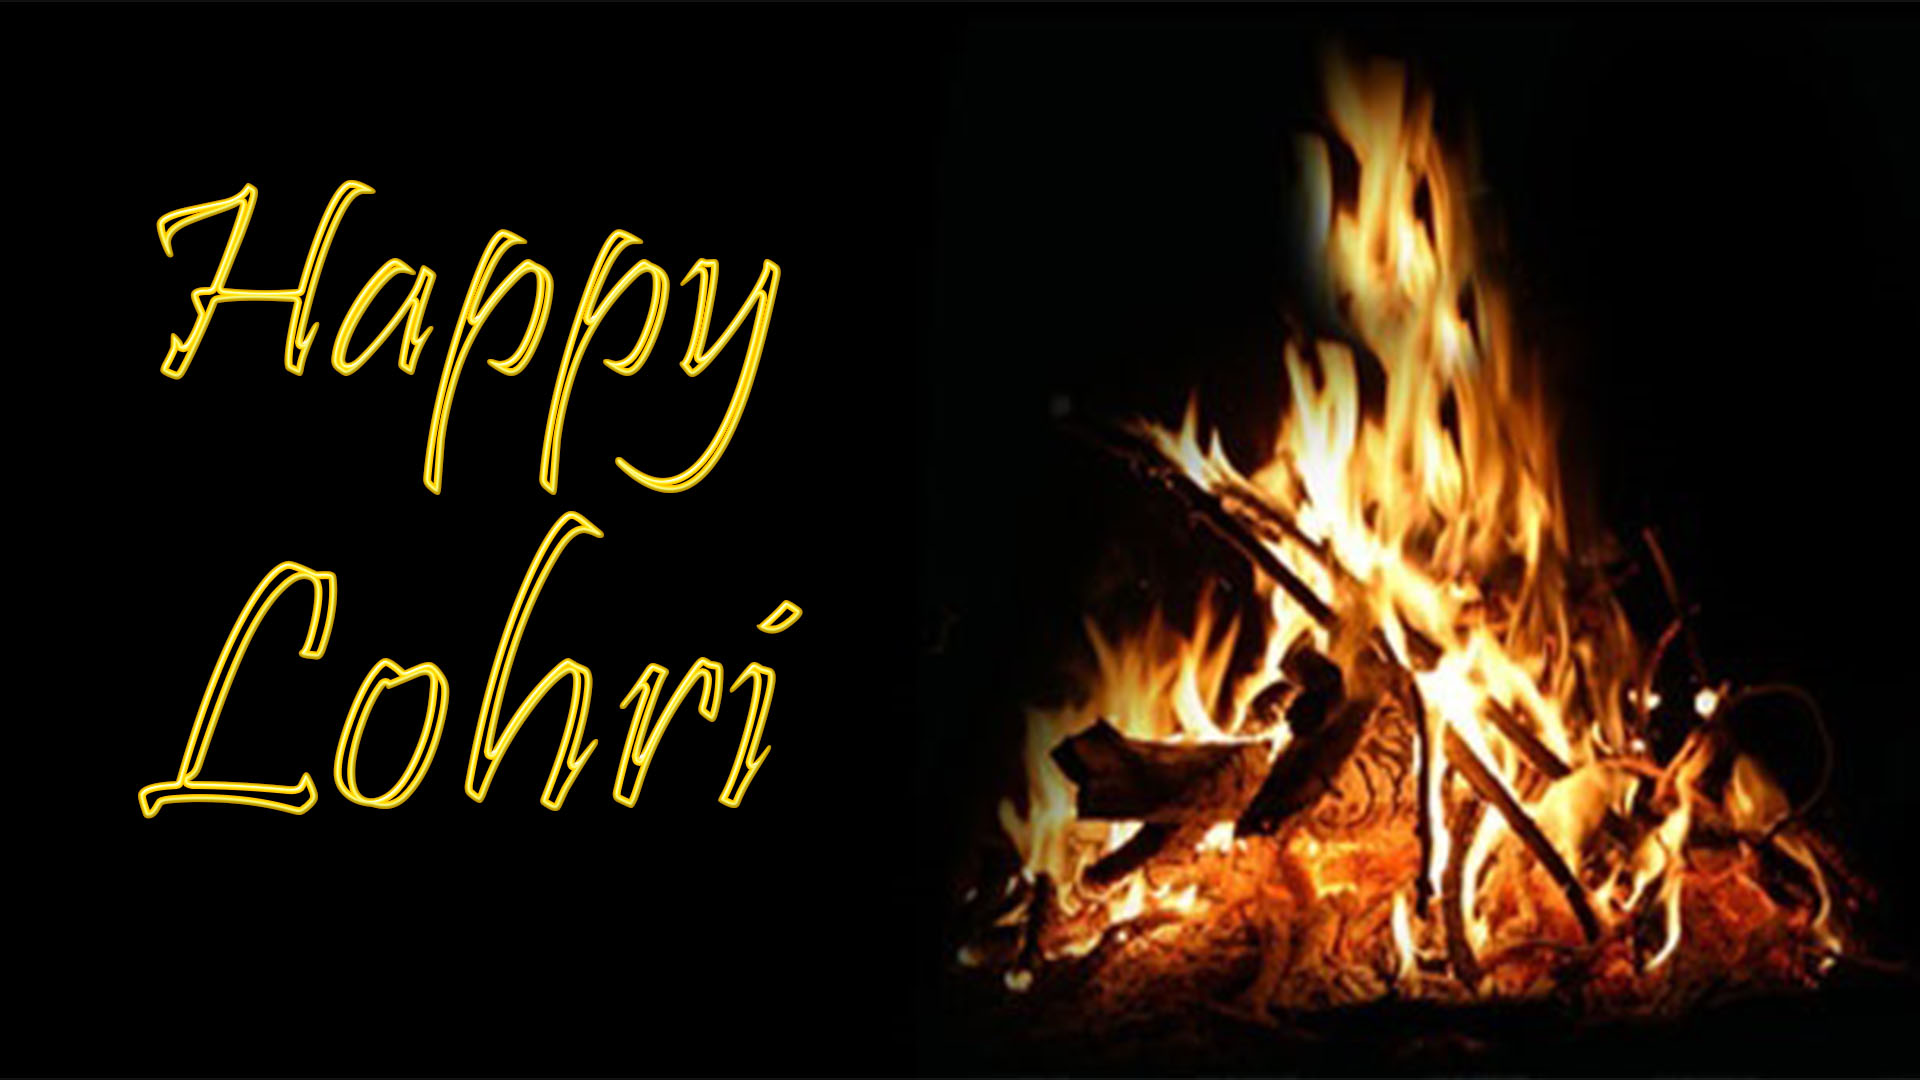 Happy Lohri Wishes & Greetings HD Images Free Download